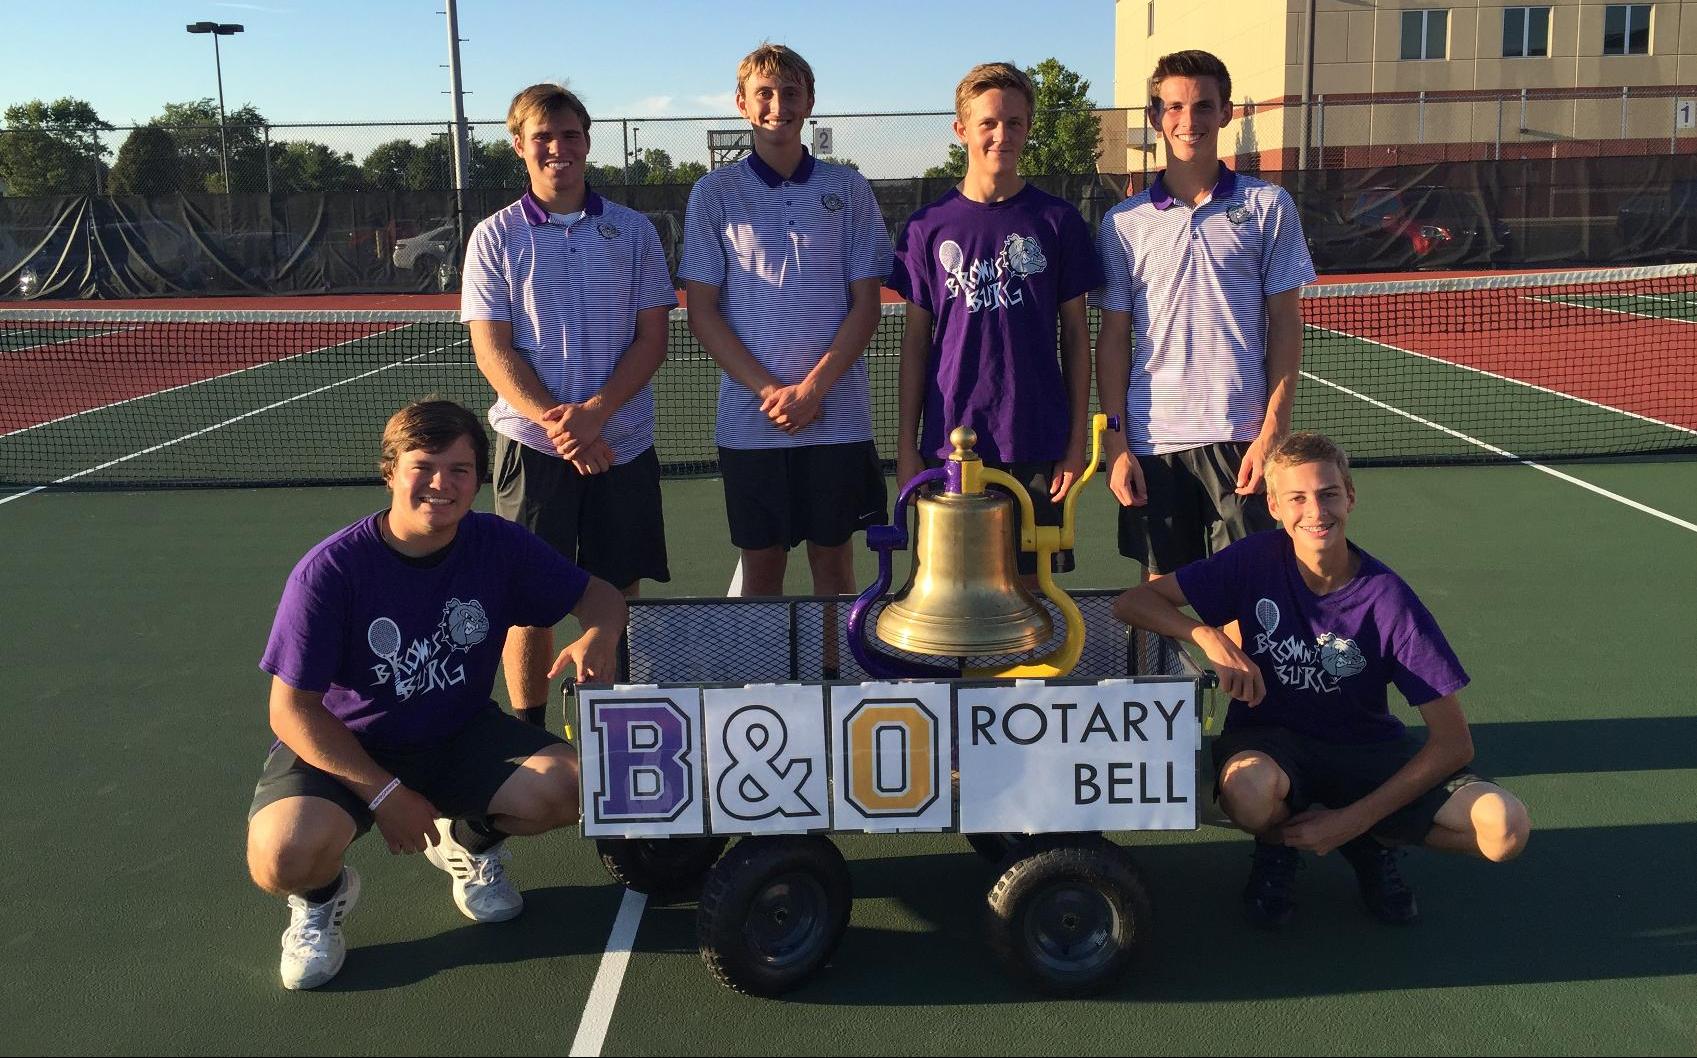 Fall B&O Bell ends in Tie